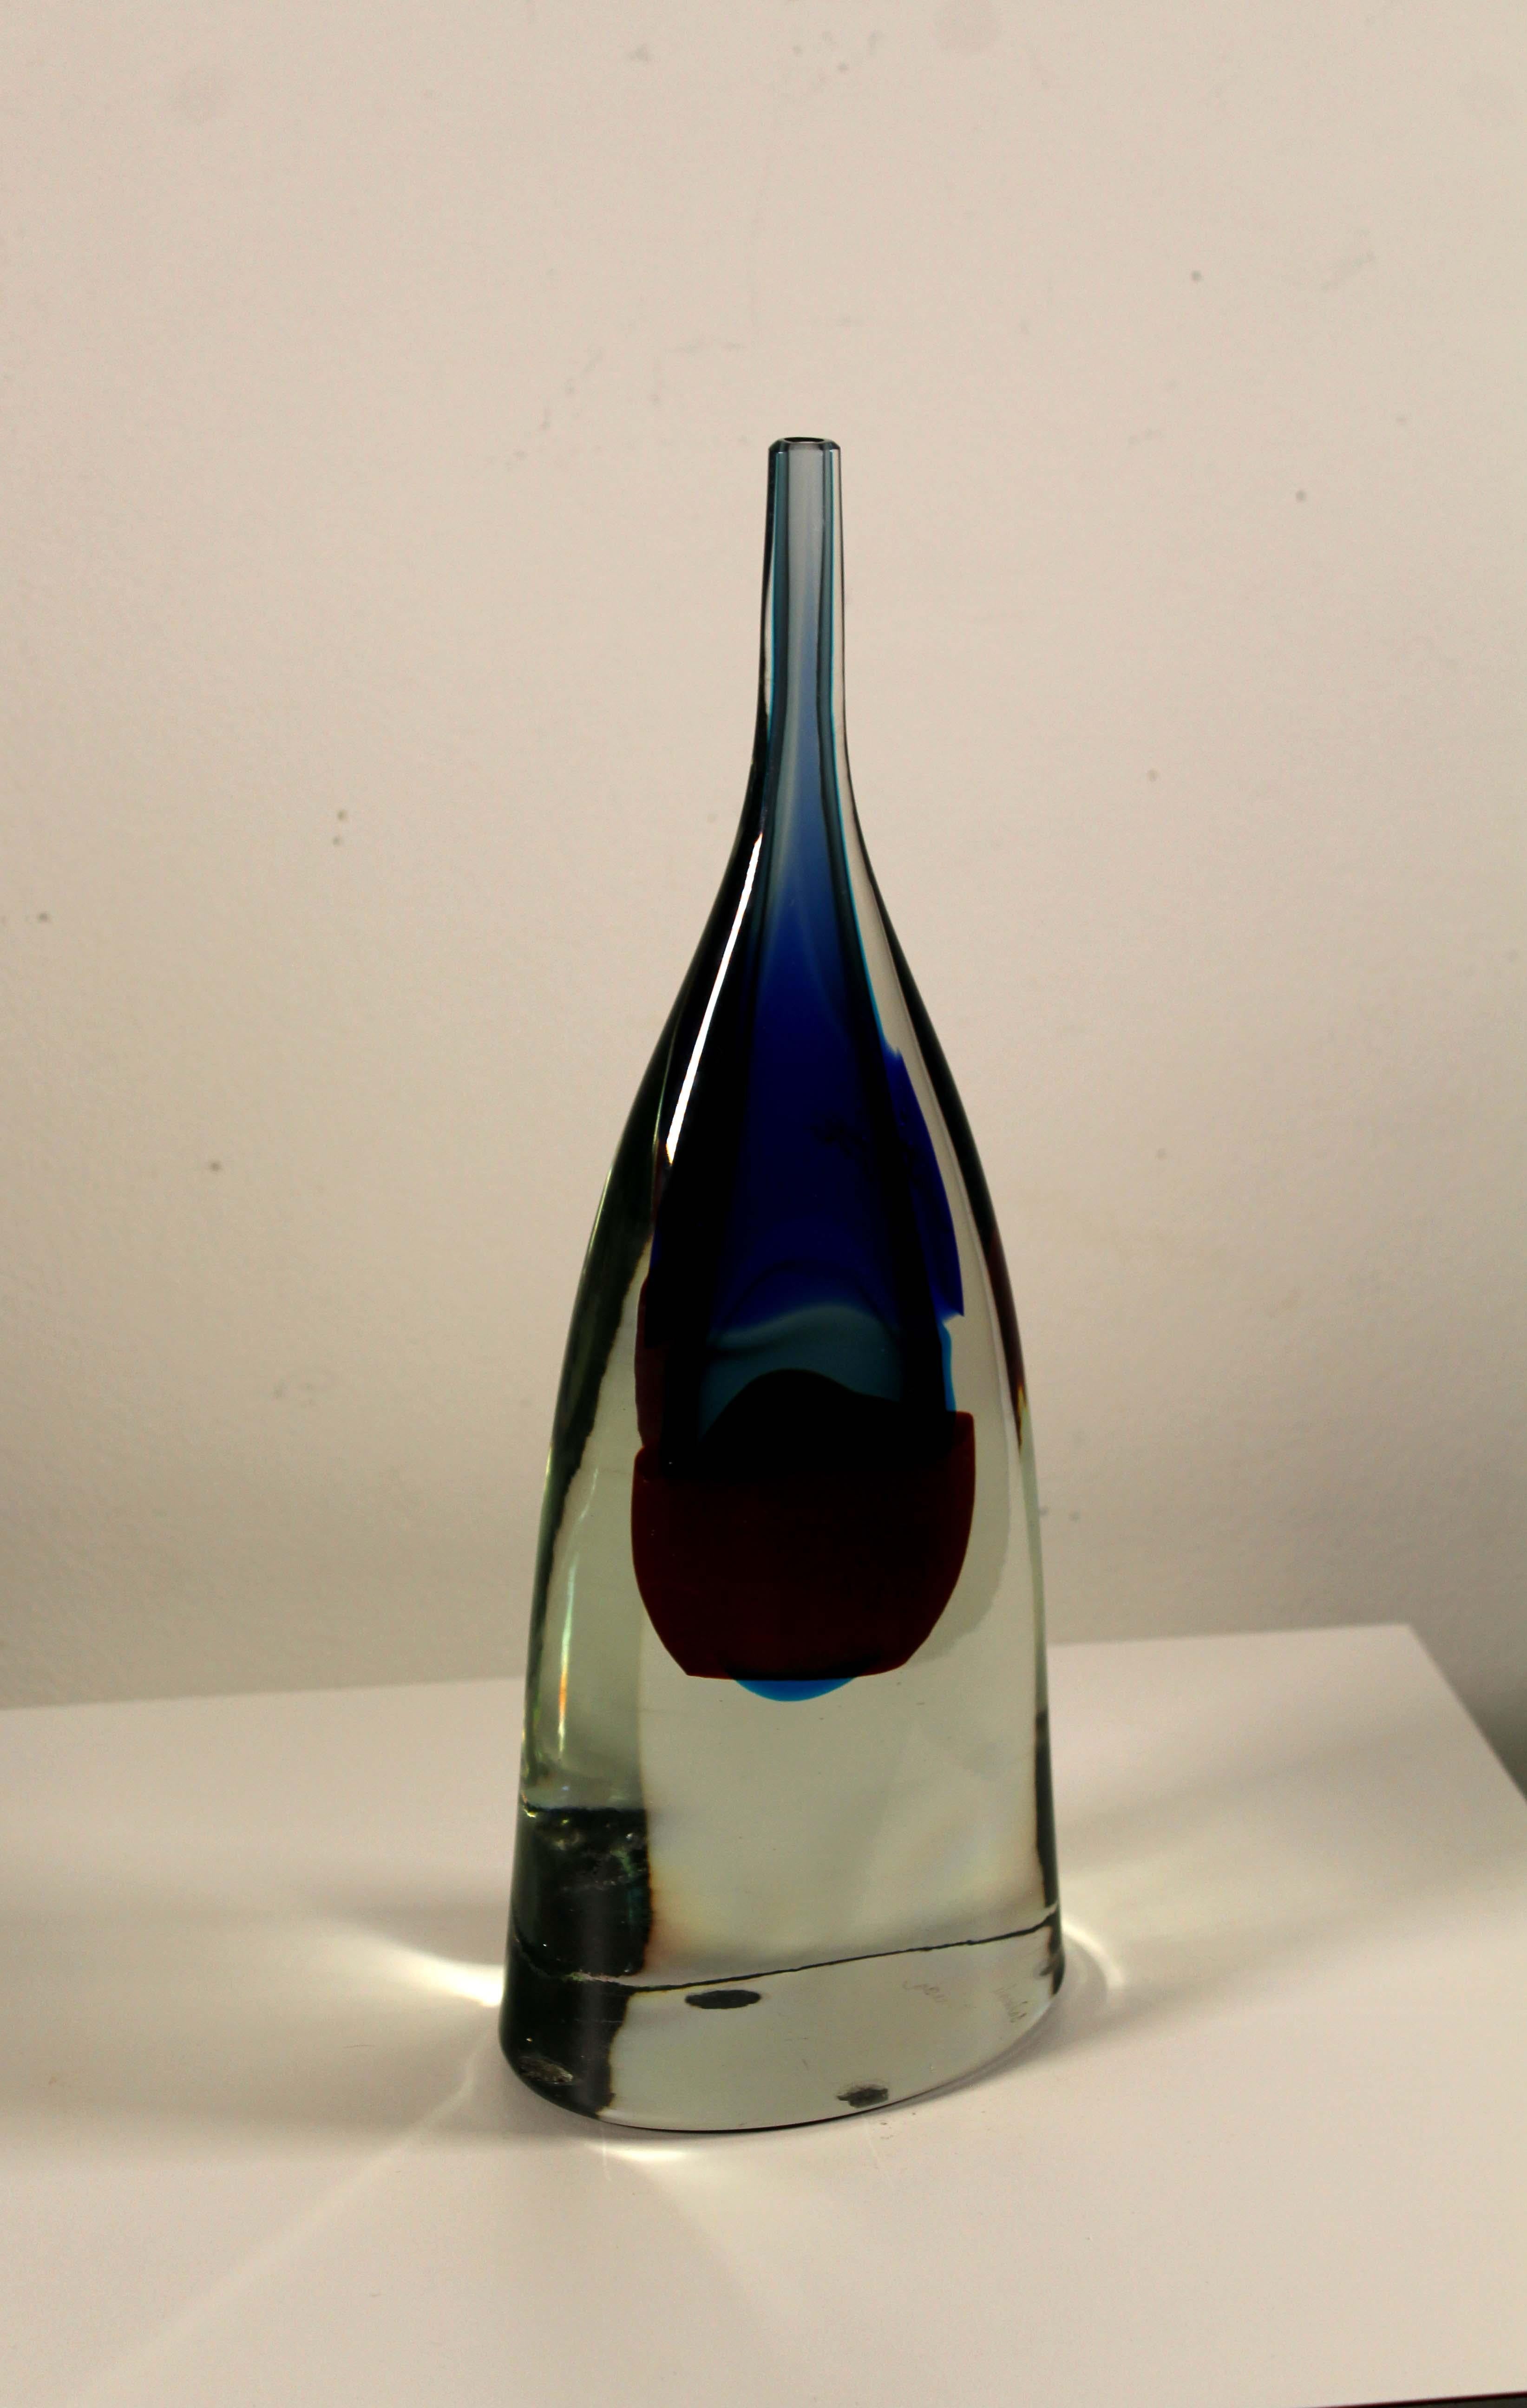 A marvelous modern Murano veil vase by Salviati from Venezia. Maker’s mark on the bottom. Since 1859, Salviati has been researching new vernaculars languages of Murano glass interpreting and modernising its inexhaustible magic, in a continual flow